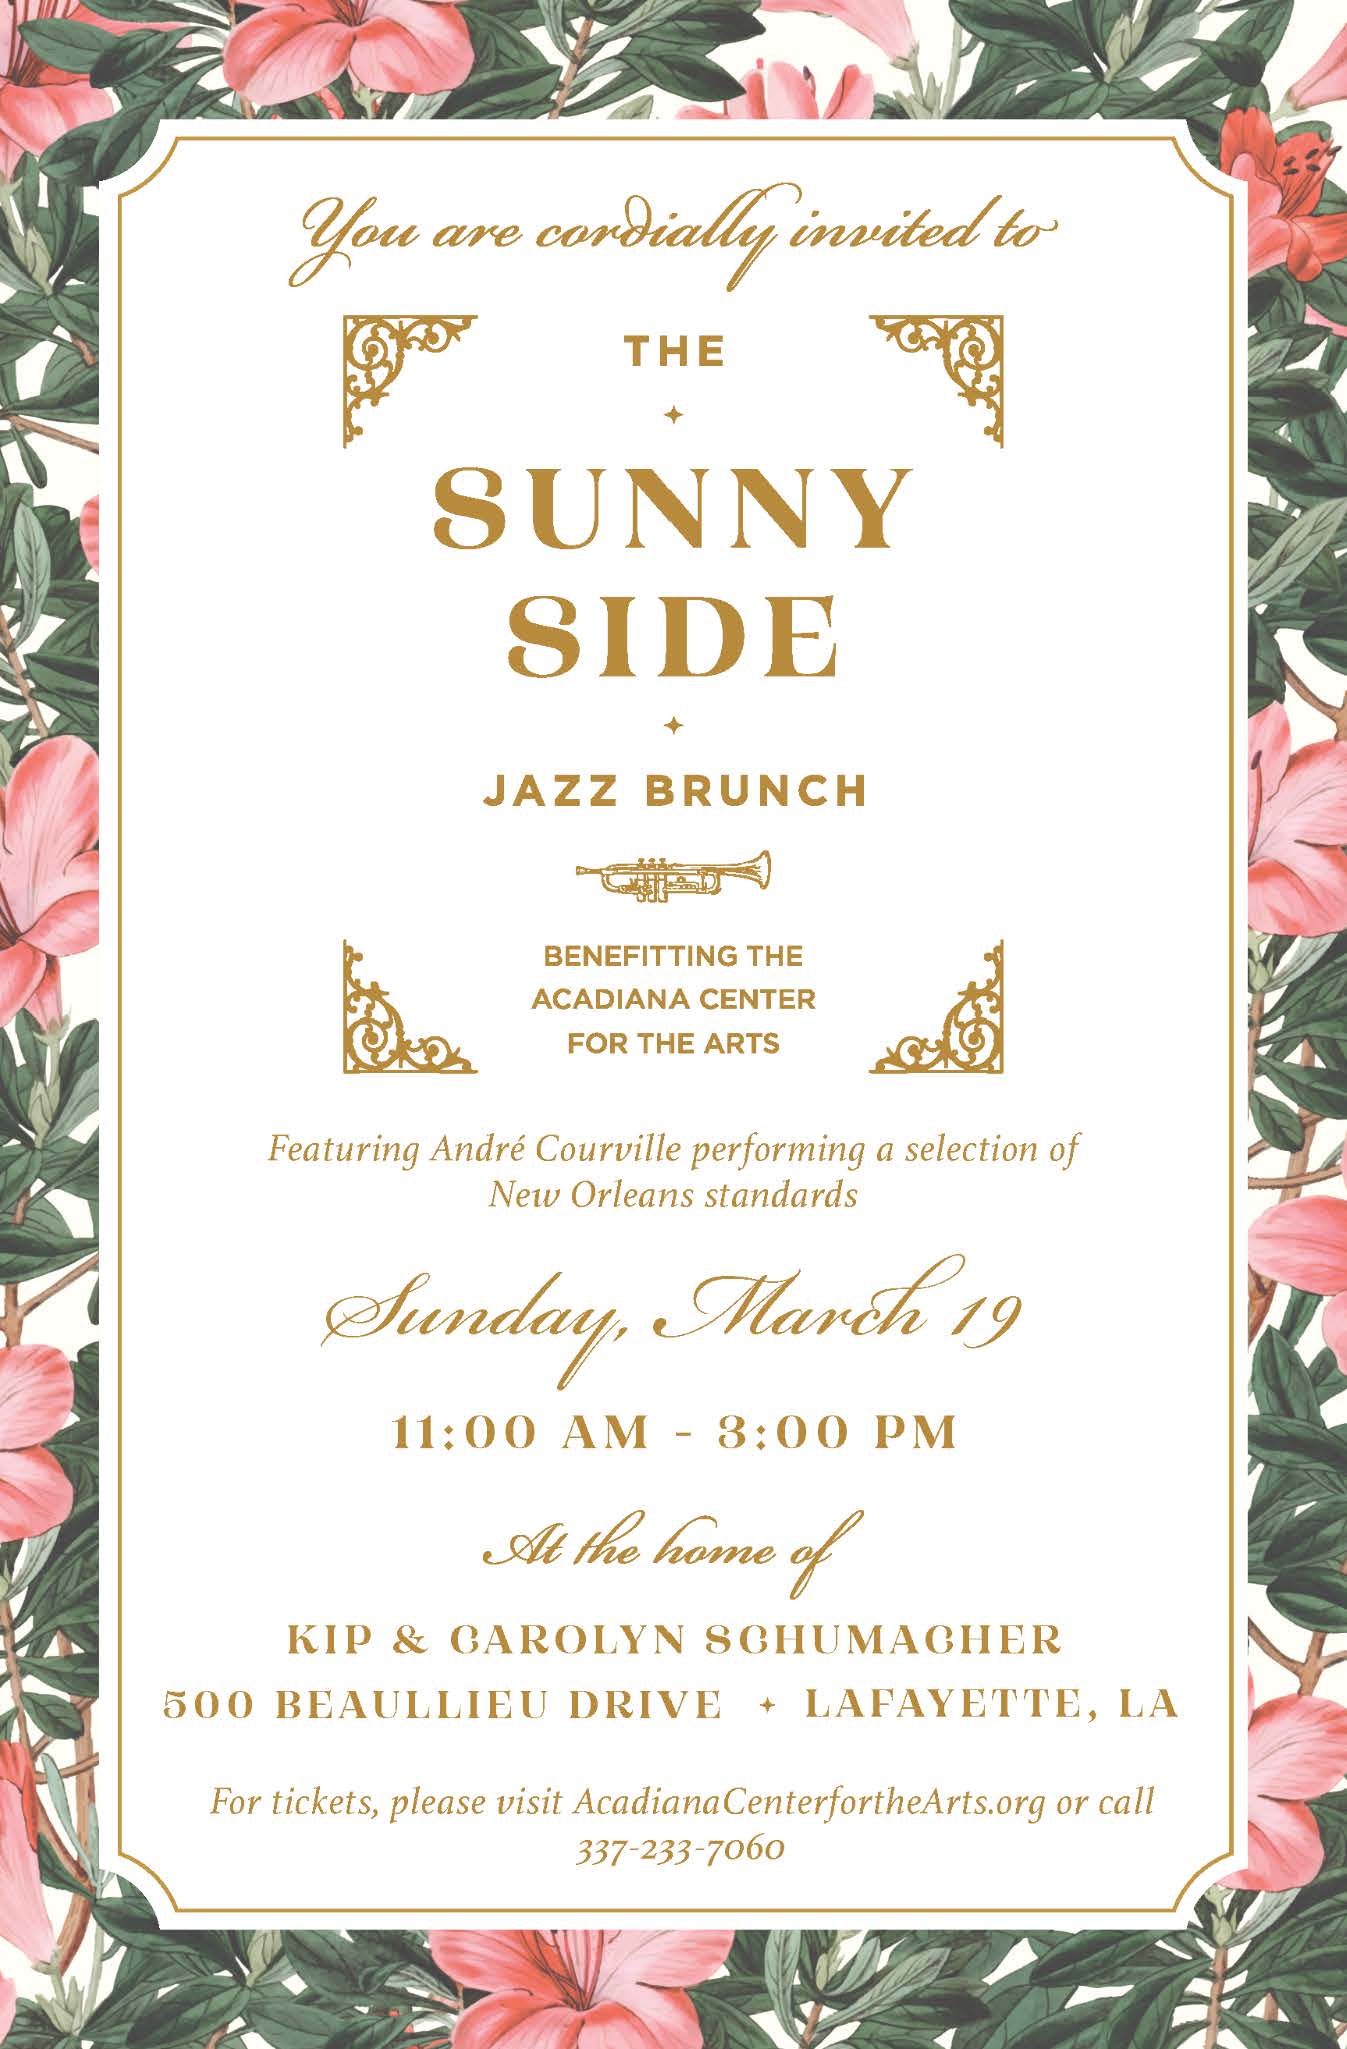 The new “Sunny Side Brunch” raises funds for the arts with a New Orleans flare on March 19.